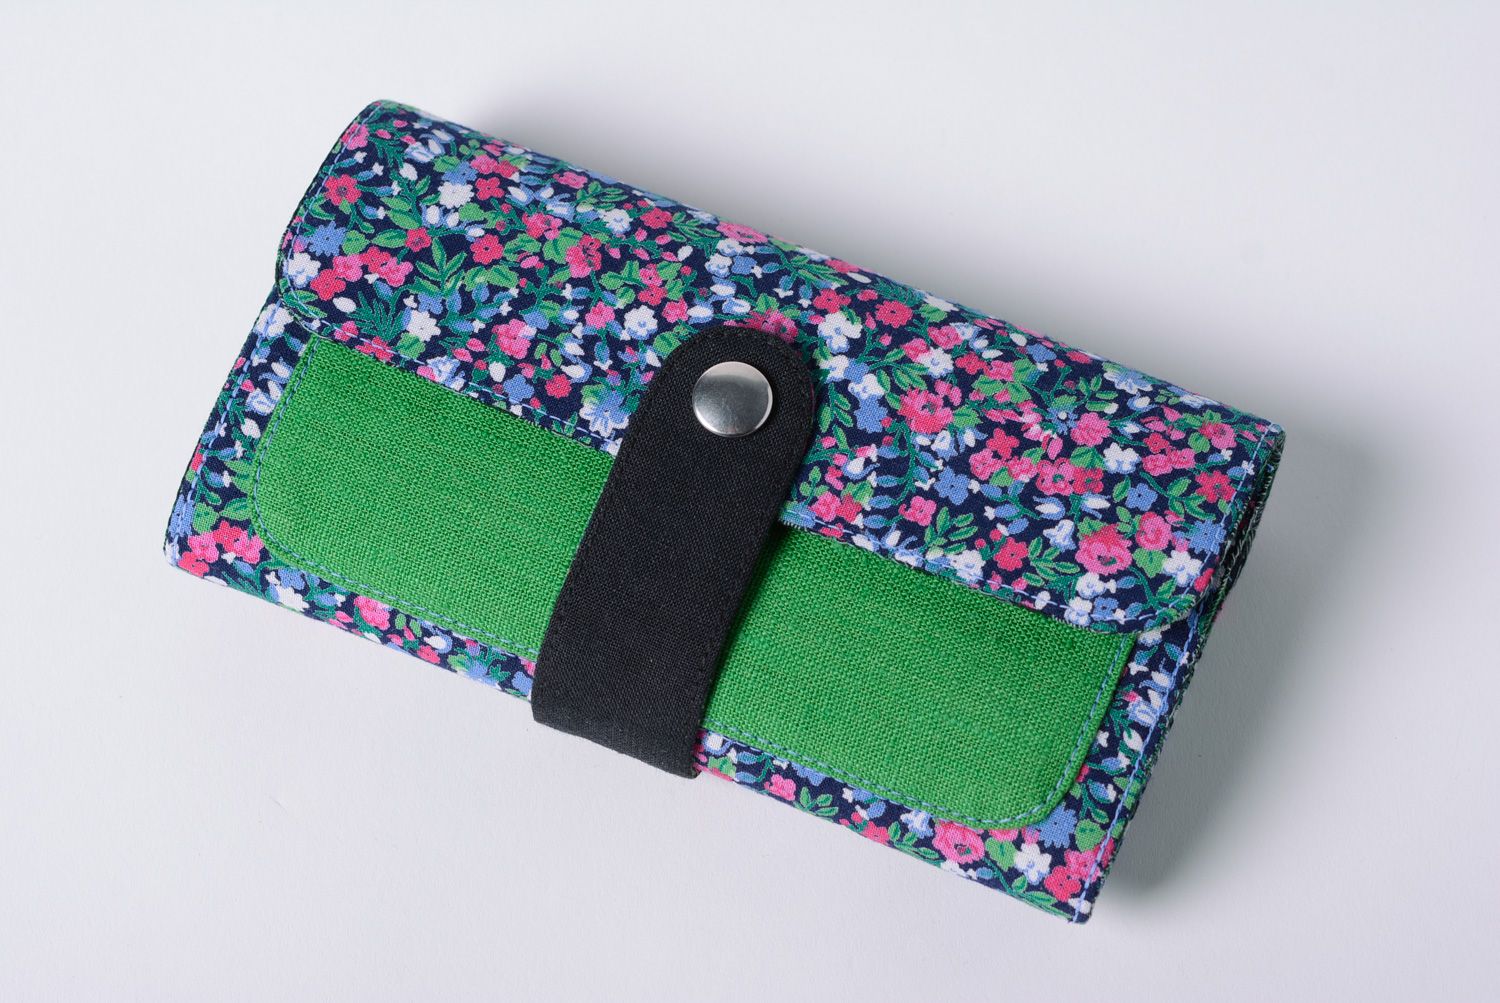 Blue and green handmade women's wallet sewn of natural fabric photo 2